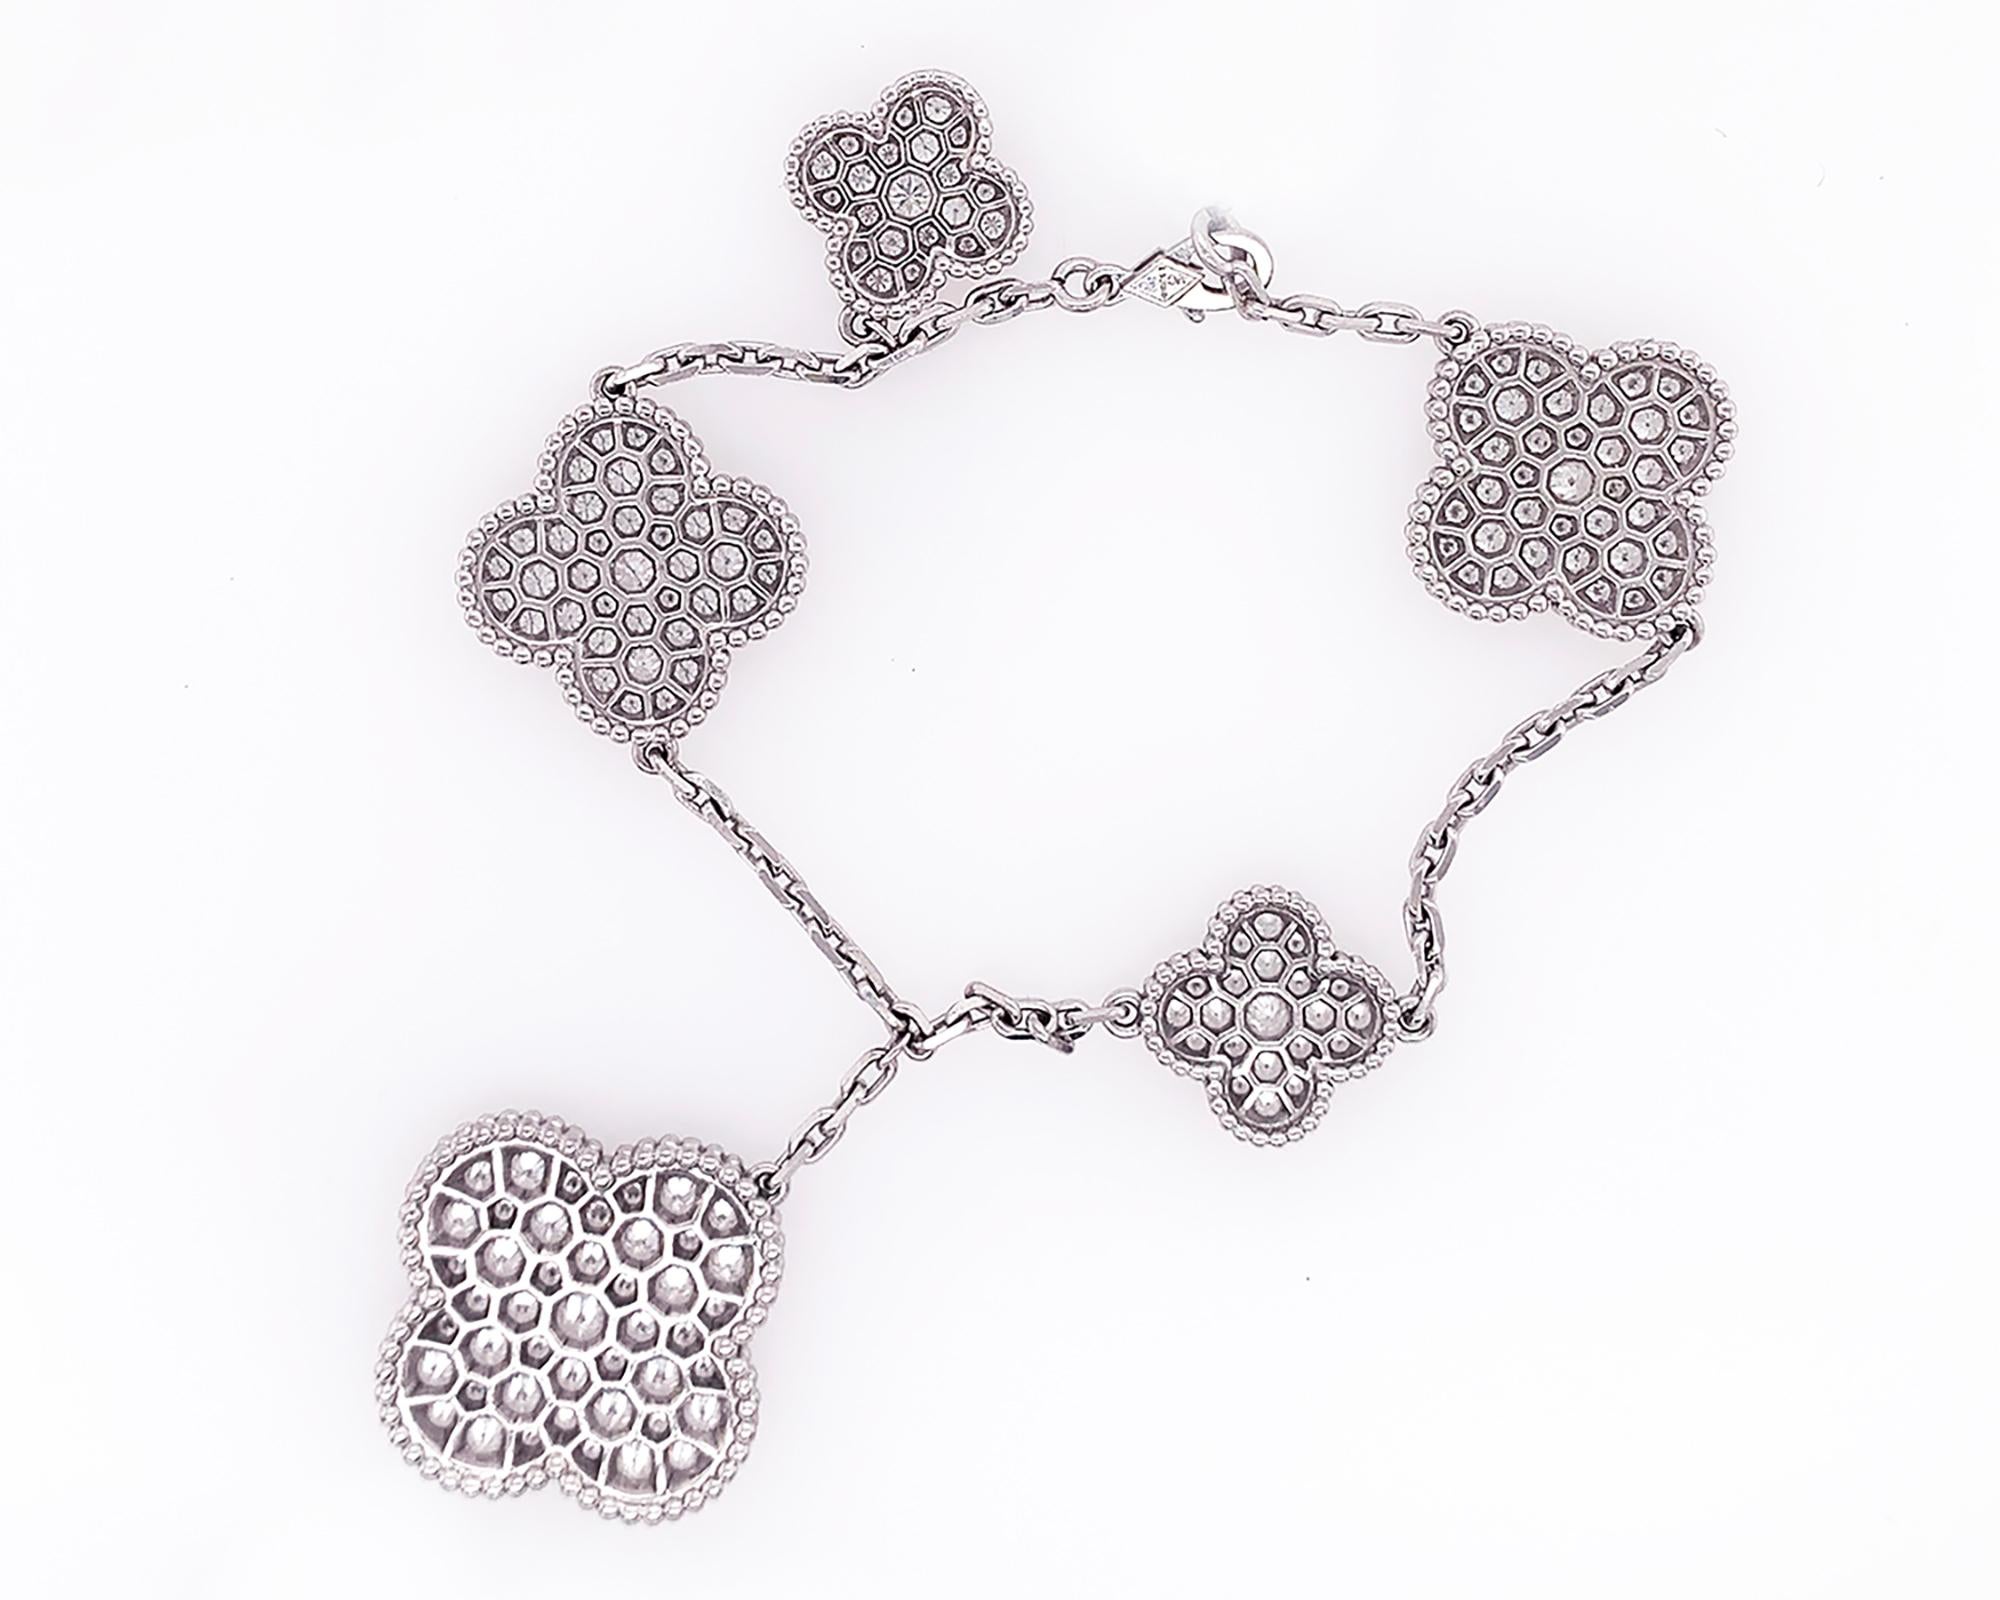 A beautiful bracelet from the Magic Alhambra collection created by Van Cleef & Arpels.
The bracelet features 5 motifs, approximately 5.64 carats of diamonds of DEF colors, IF-VVS clarity.
Hallmark clasp. 18K white gold.
Bracelet wrist size is 7.48